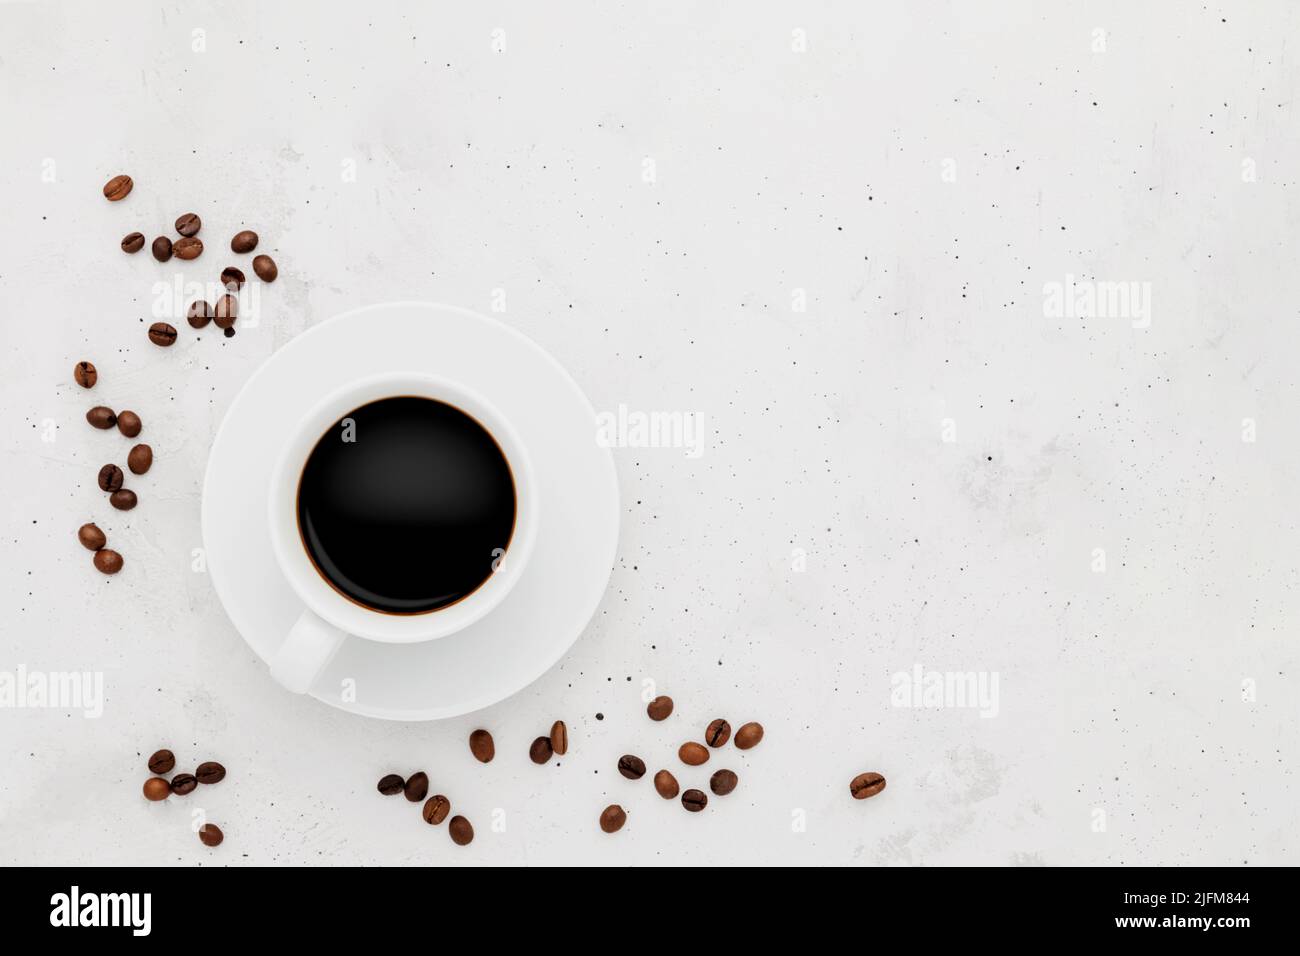 Top view on flat lay with single one full coffee cup composition on gray white concrete background. Tea mug collection layout. Dried coffee beans around. Black espresso or americano. Copy space area Stock Photo